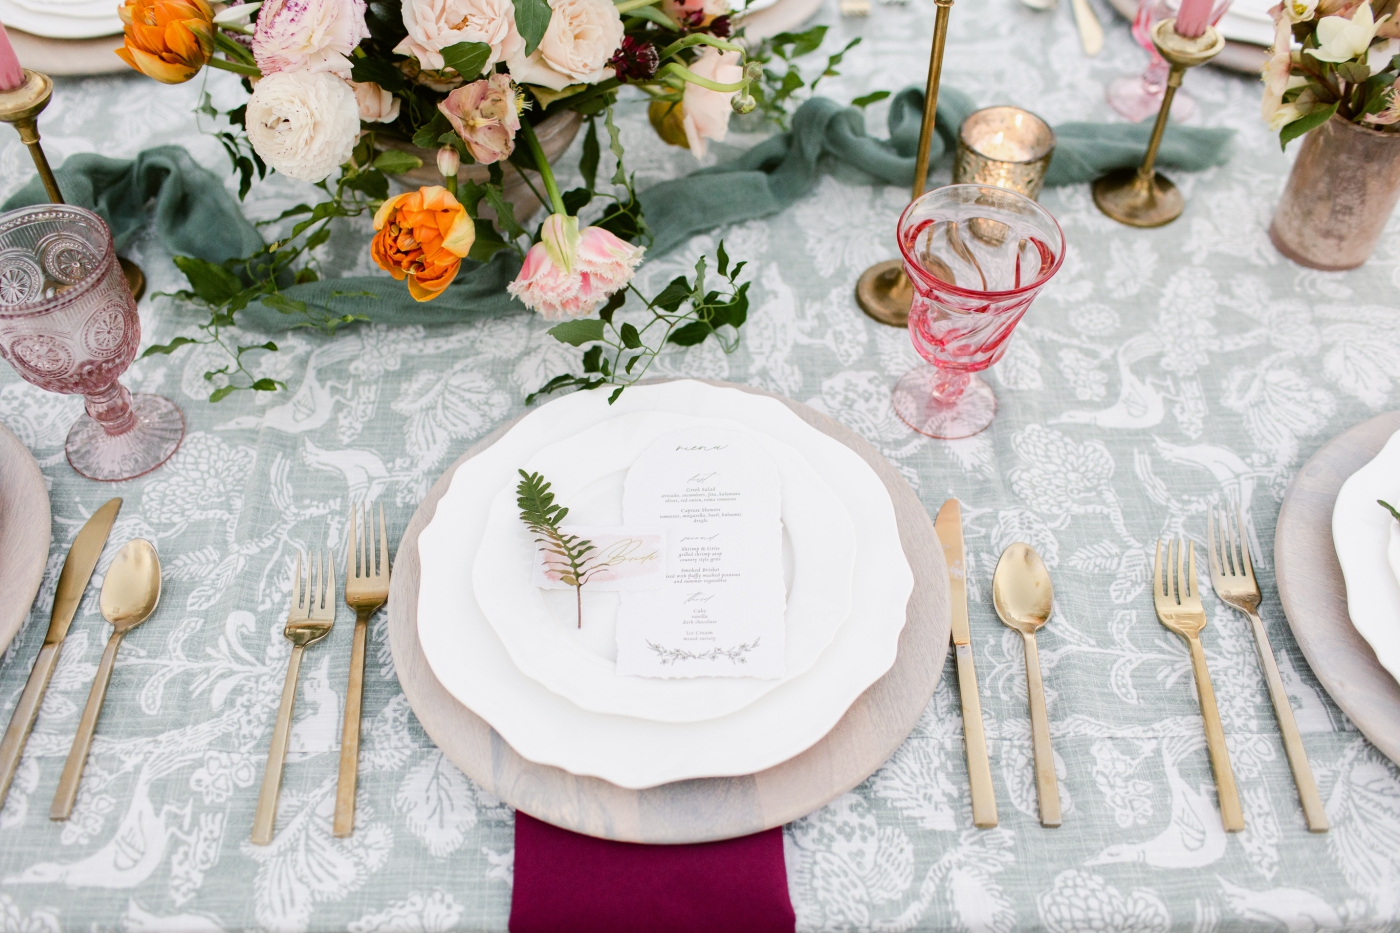 2022 wedding table settings trends